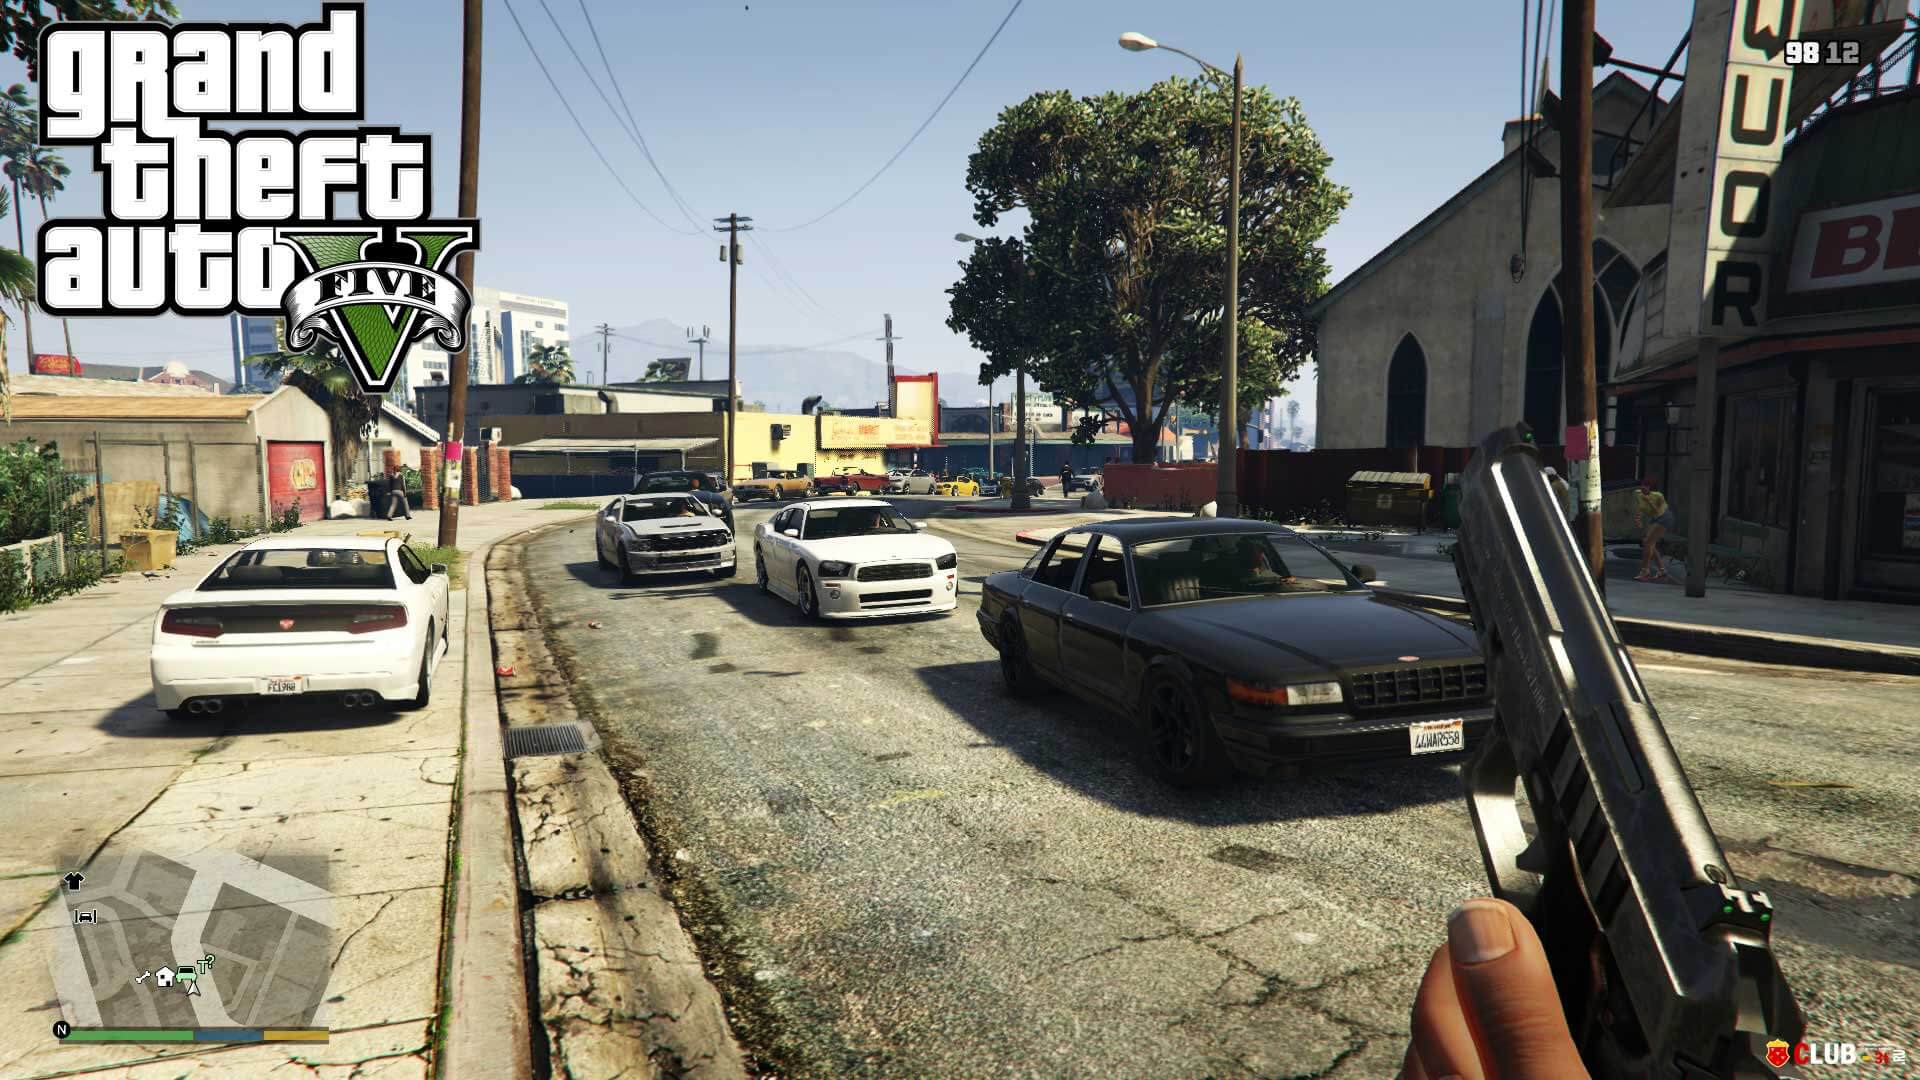 4. Free Shark Card Codes - Get Instant Codes for Grand Theft Auto V - wide 5